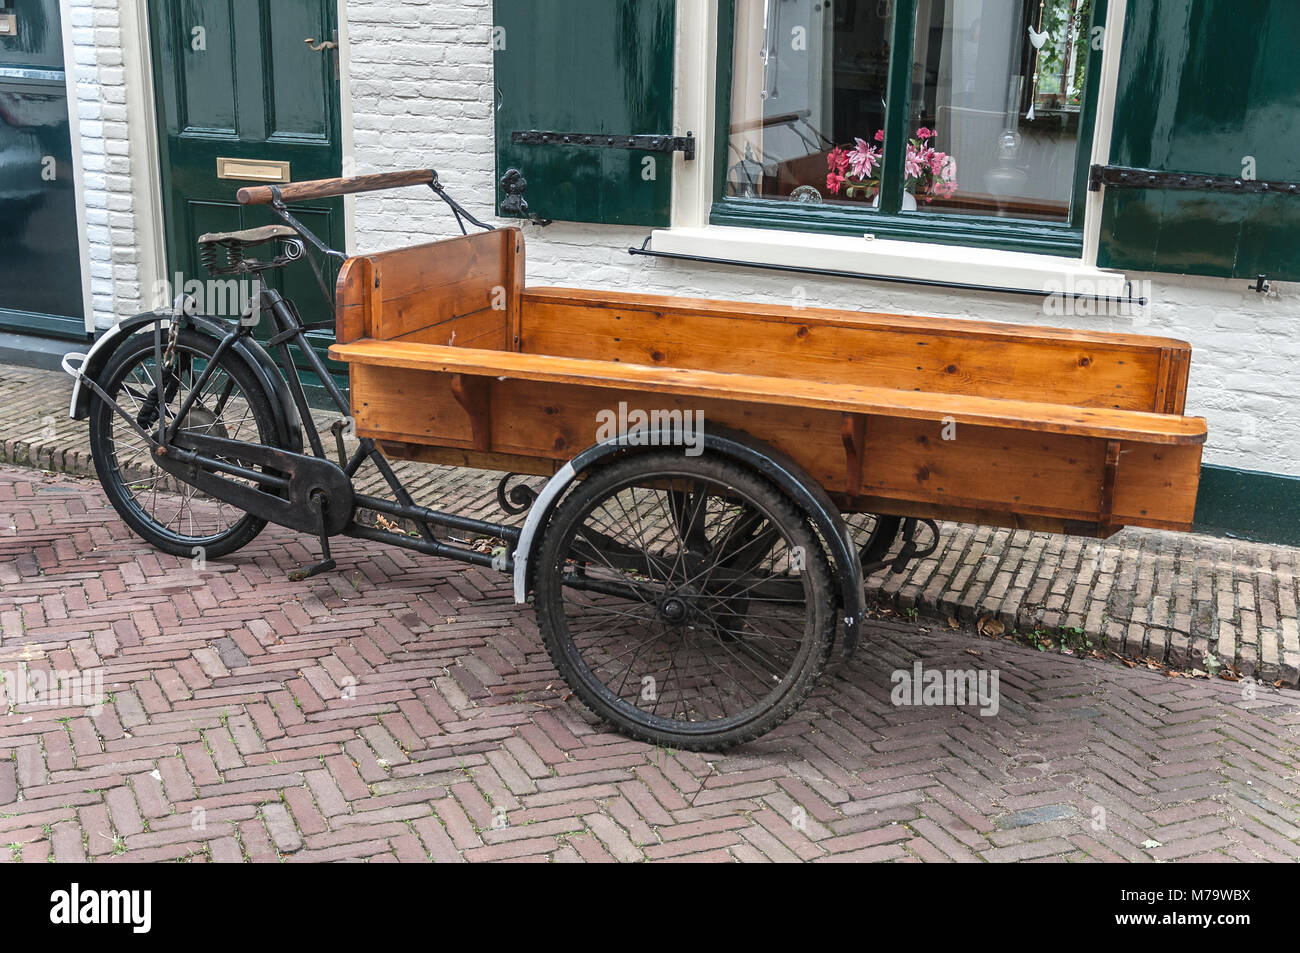 old-dutch-cargo-bike-parked-in-front-of-a-house-M79WBX.jpg